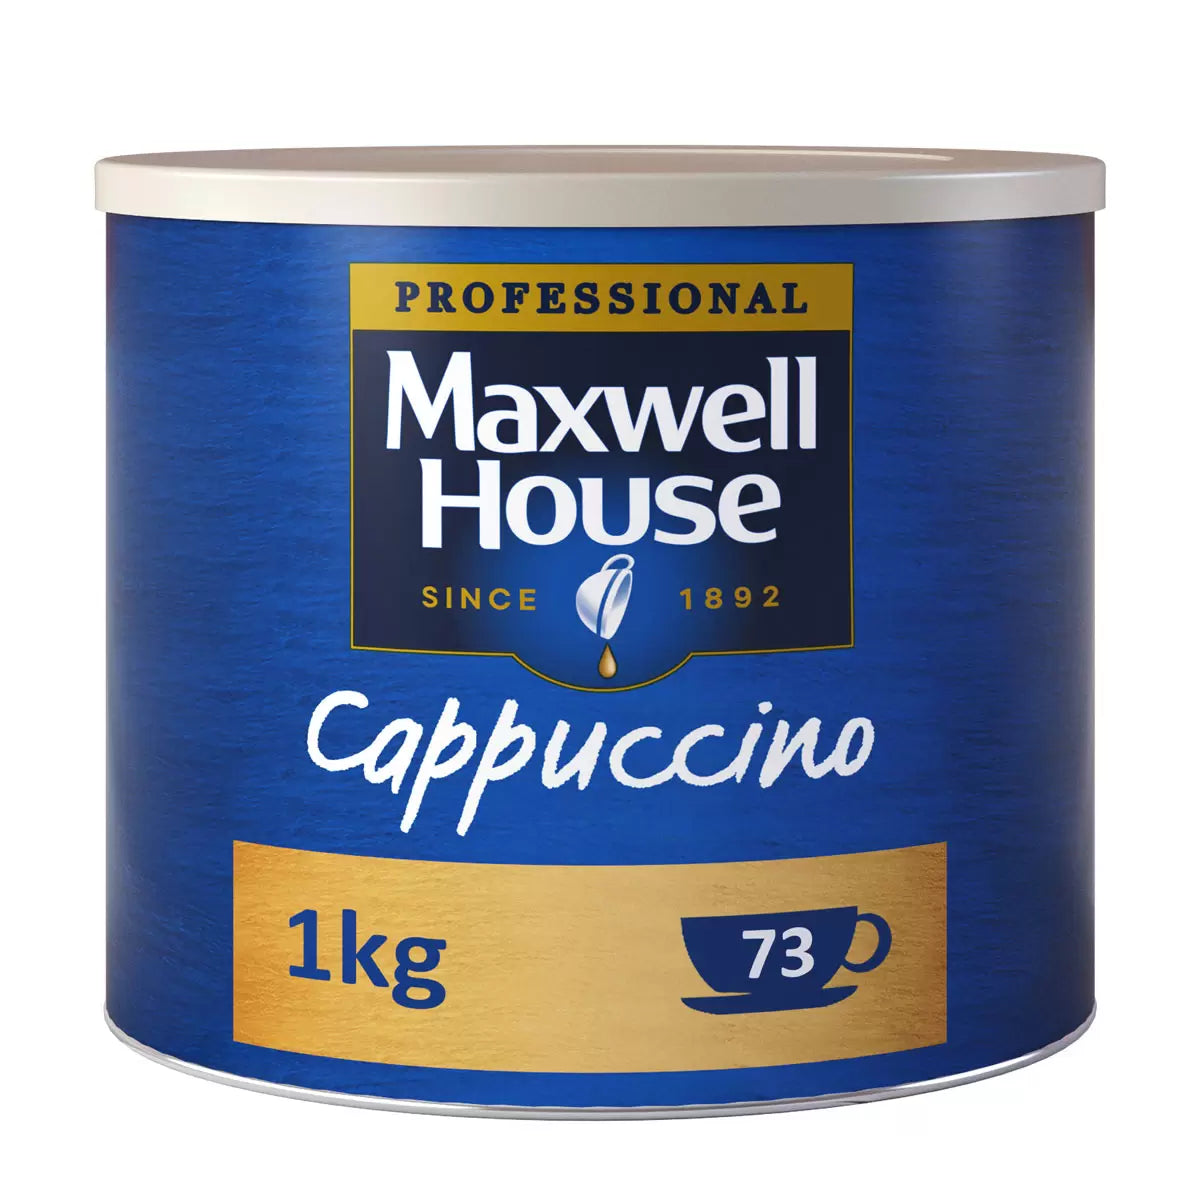 Maxwell House Cappuccino Coffee - 1kg